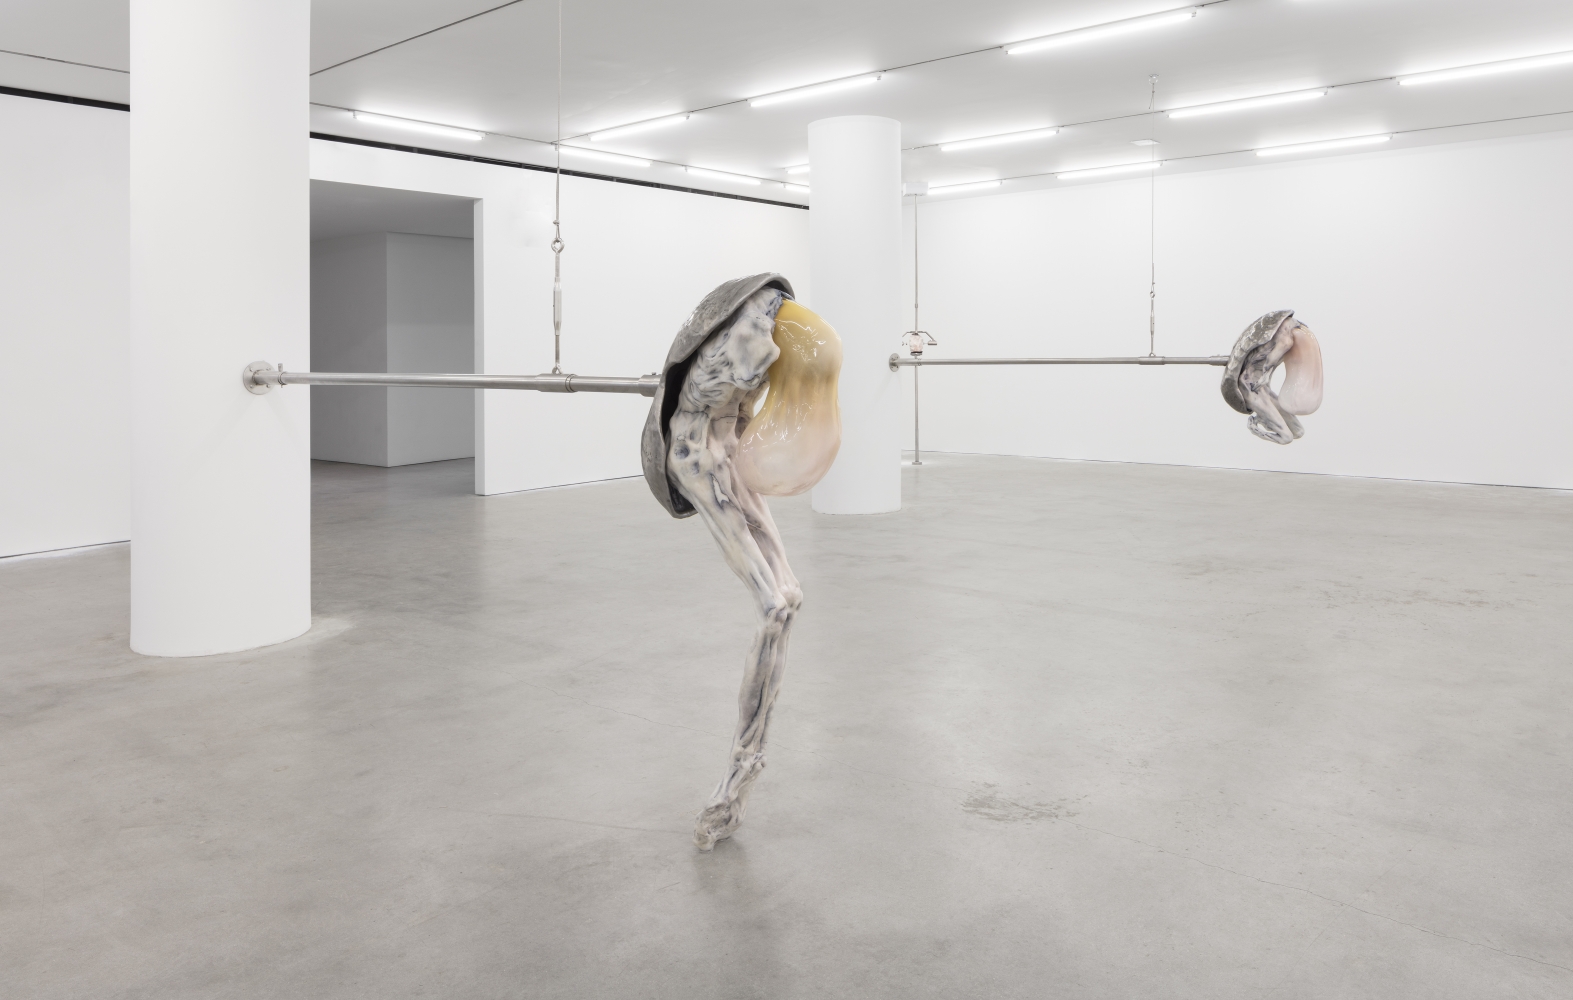 Installation shot of two humanoid figures emerging from oval shell attached by stainless steel rod in an Ivana Bašić exhibition.